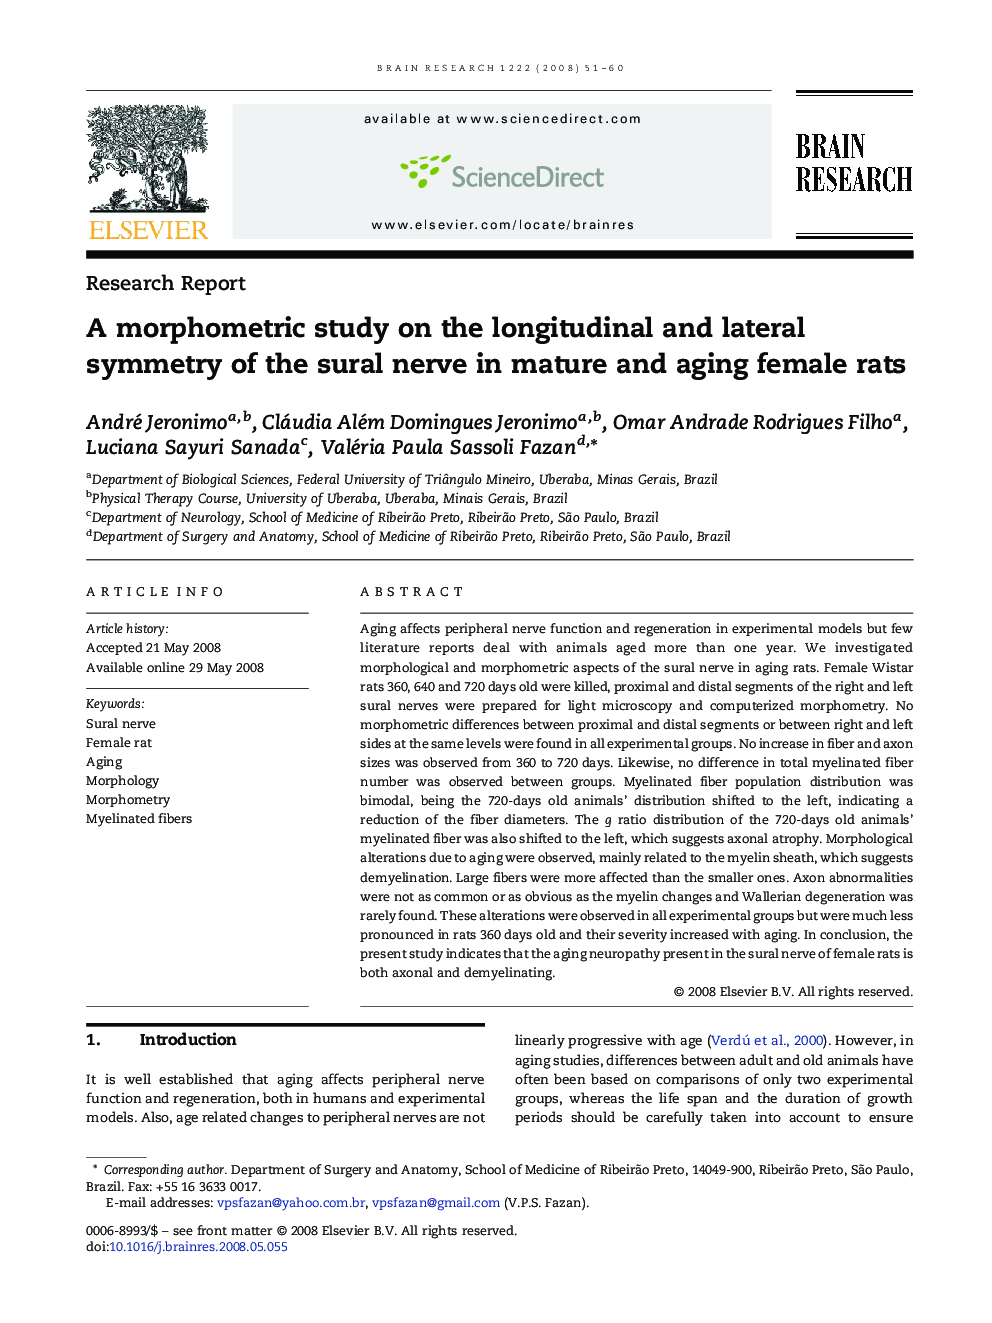 A morphometric study on the longitudinal and lateral symmetry of the sural nerve in mature and aging female rats